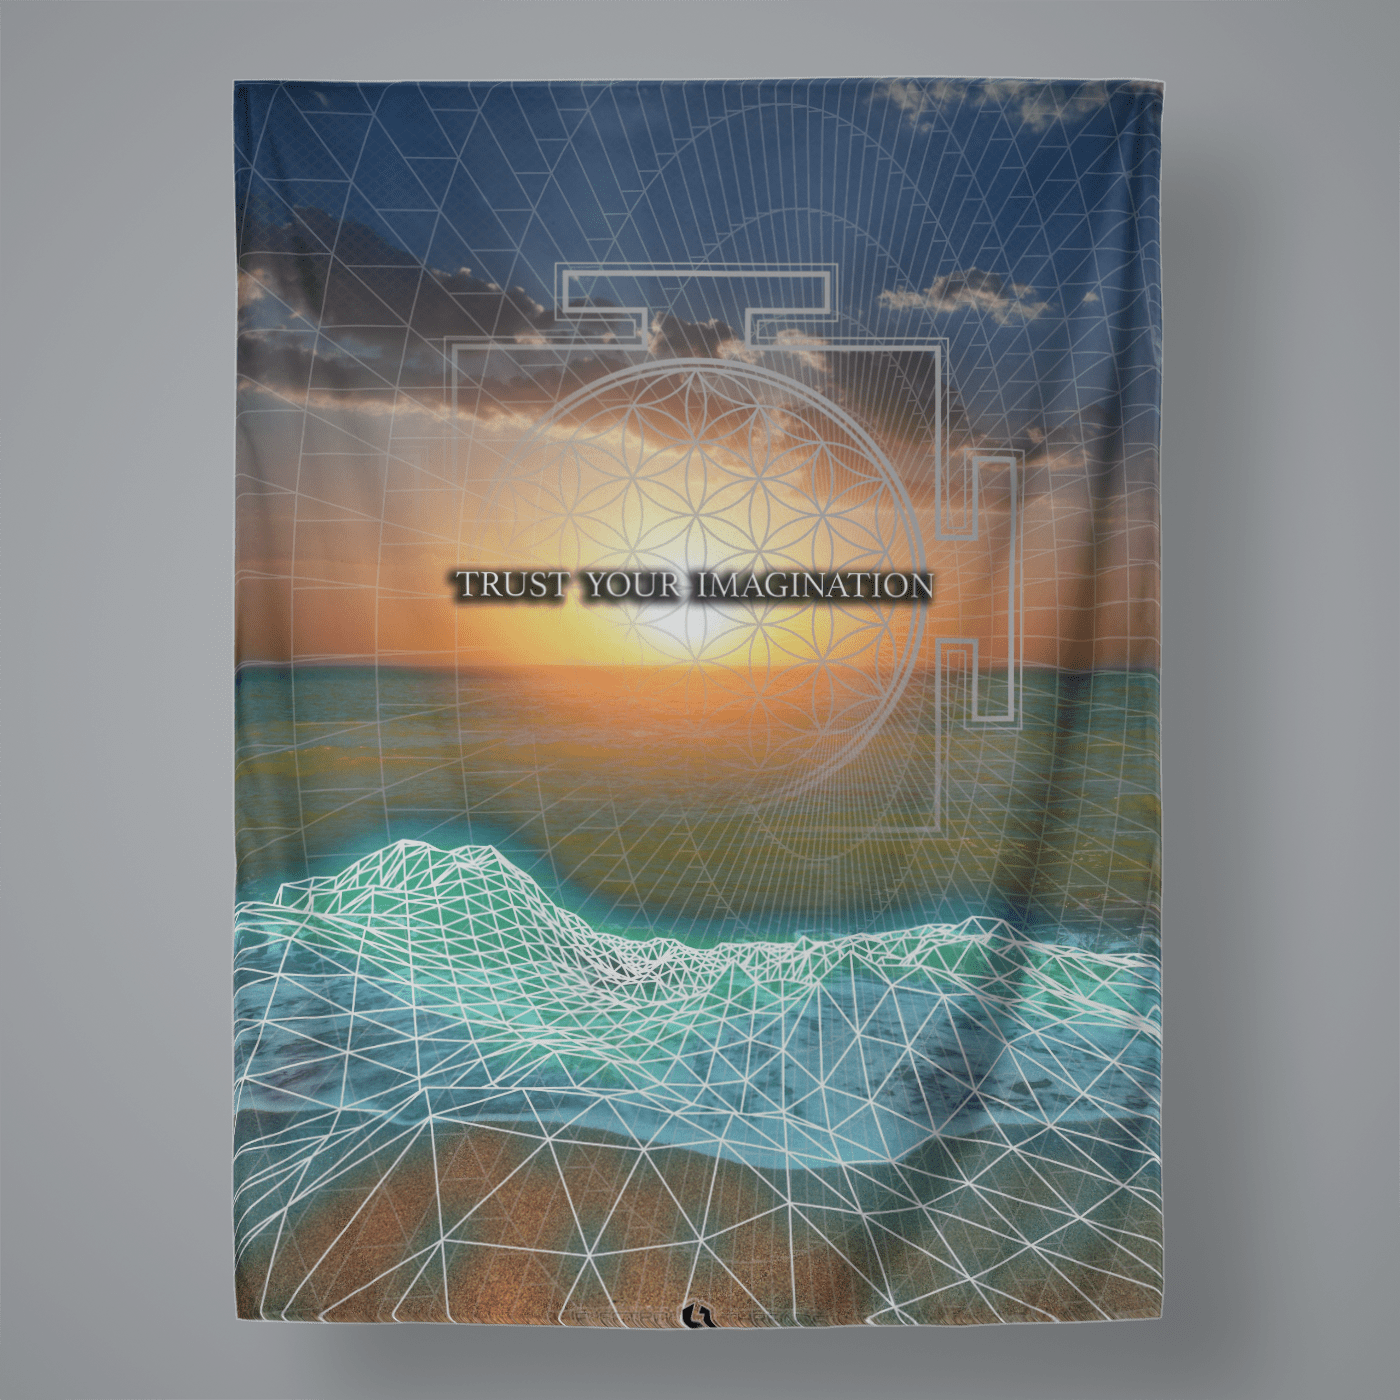 TRUST YOUR IMAGINATION TAPESTRY Electro Threads LARGE: 60 x 80 